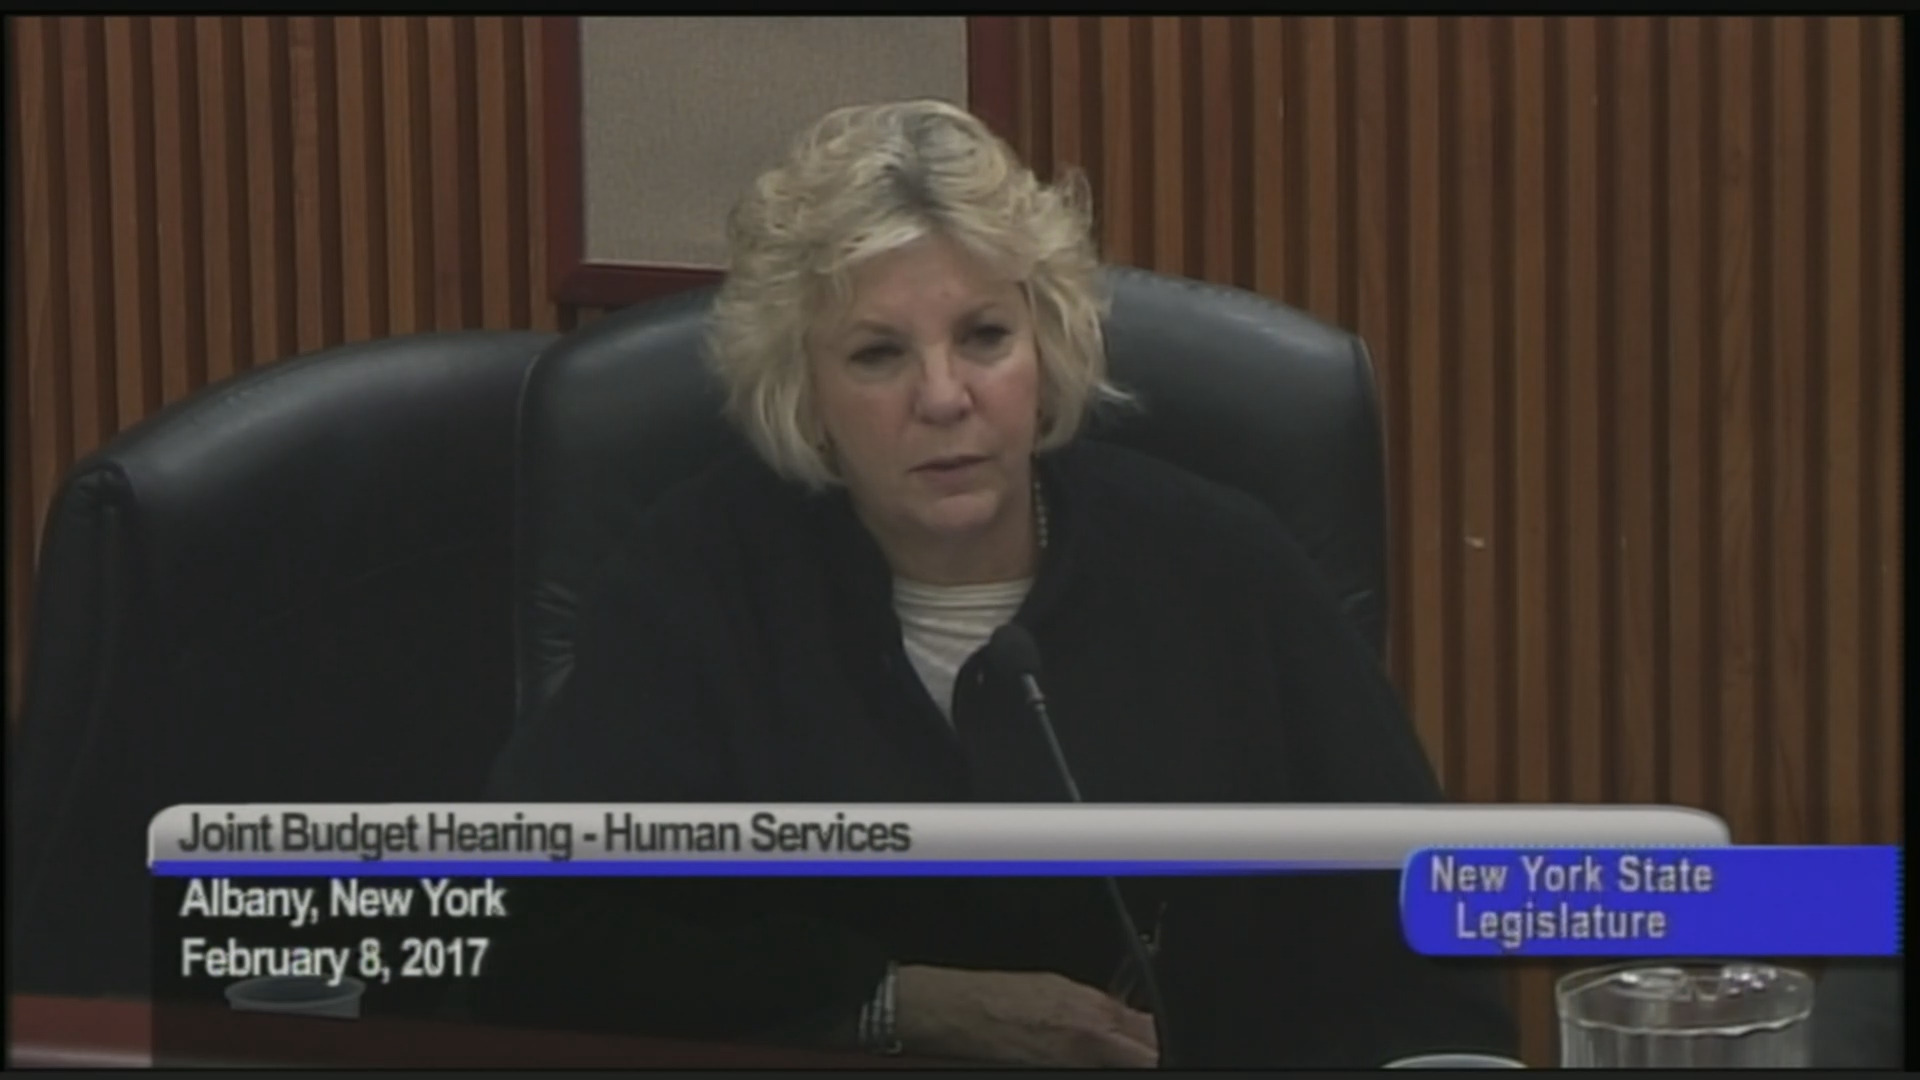 Assembly-Senate Budget Hearing on Funding for Human Services